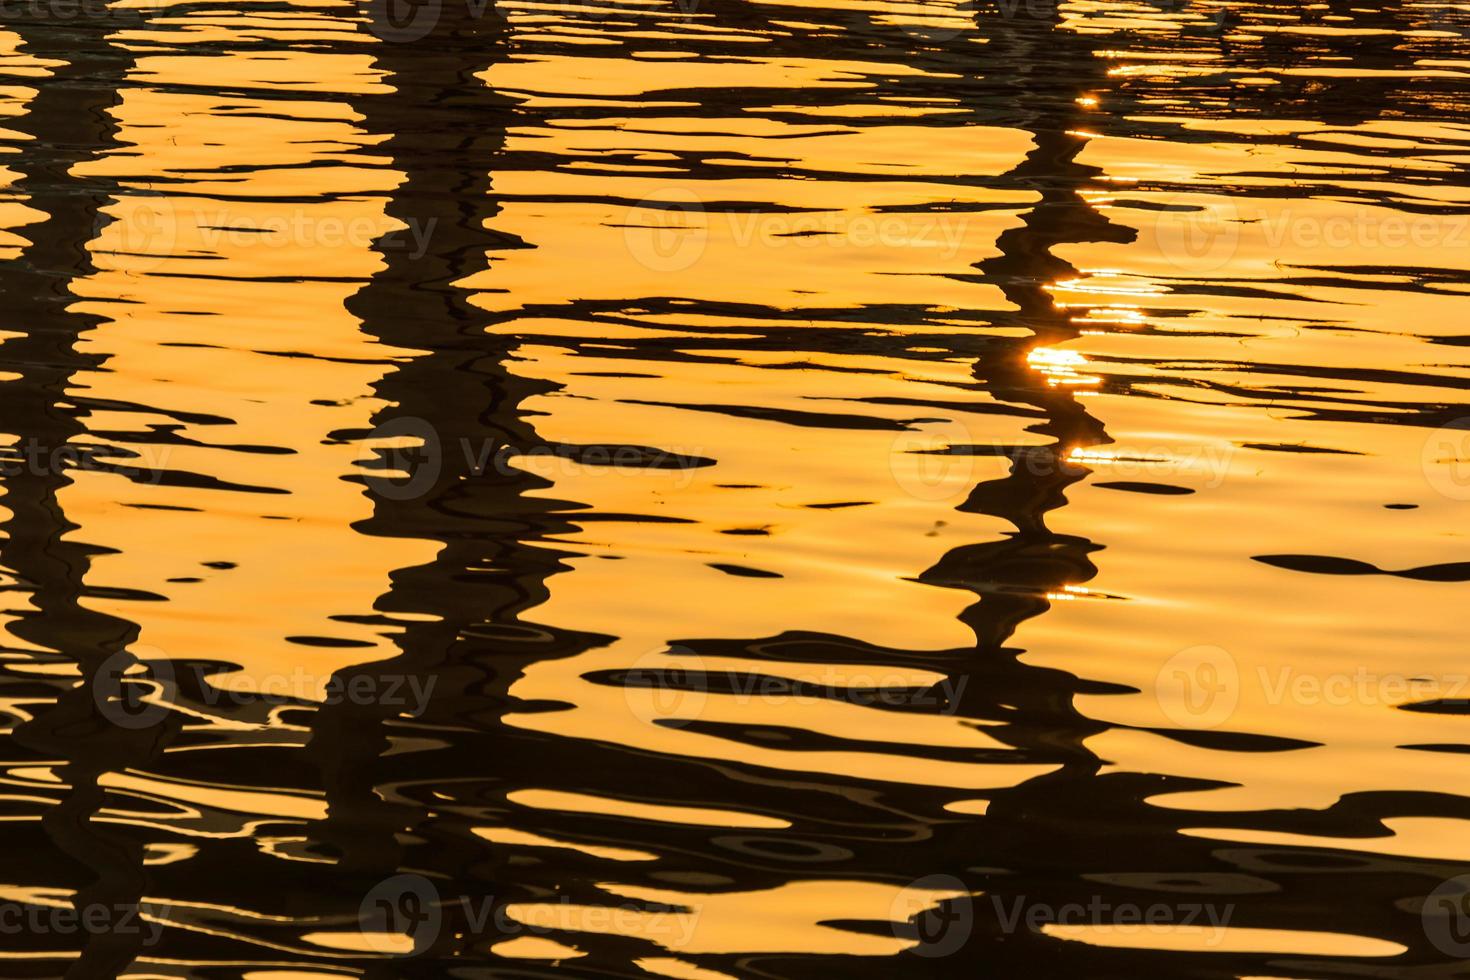 water surface with sparkling light reflections photo